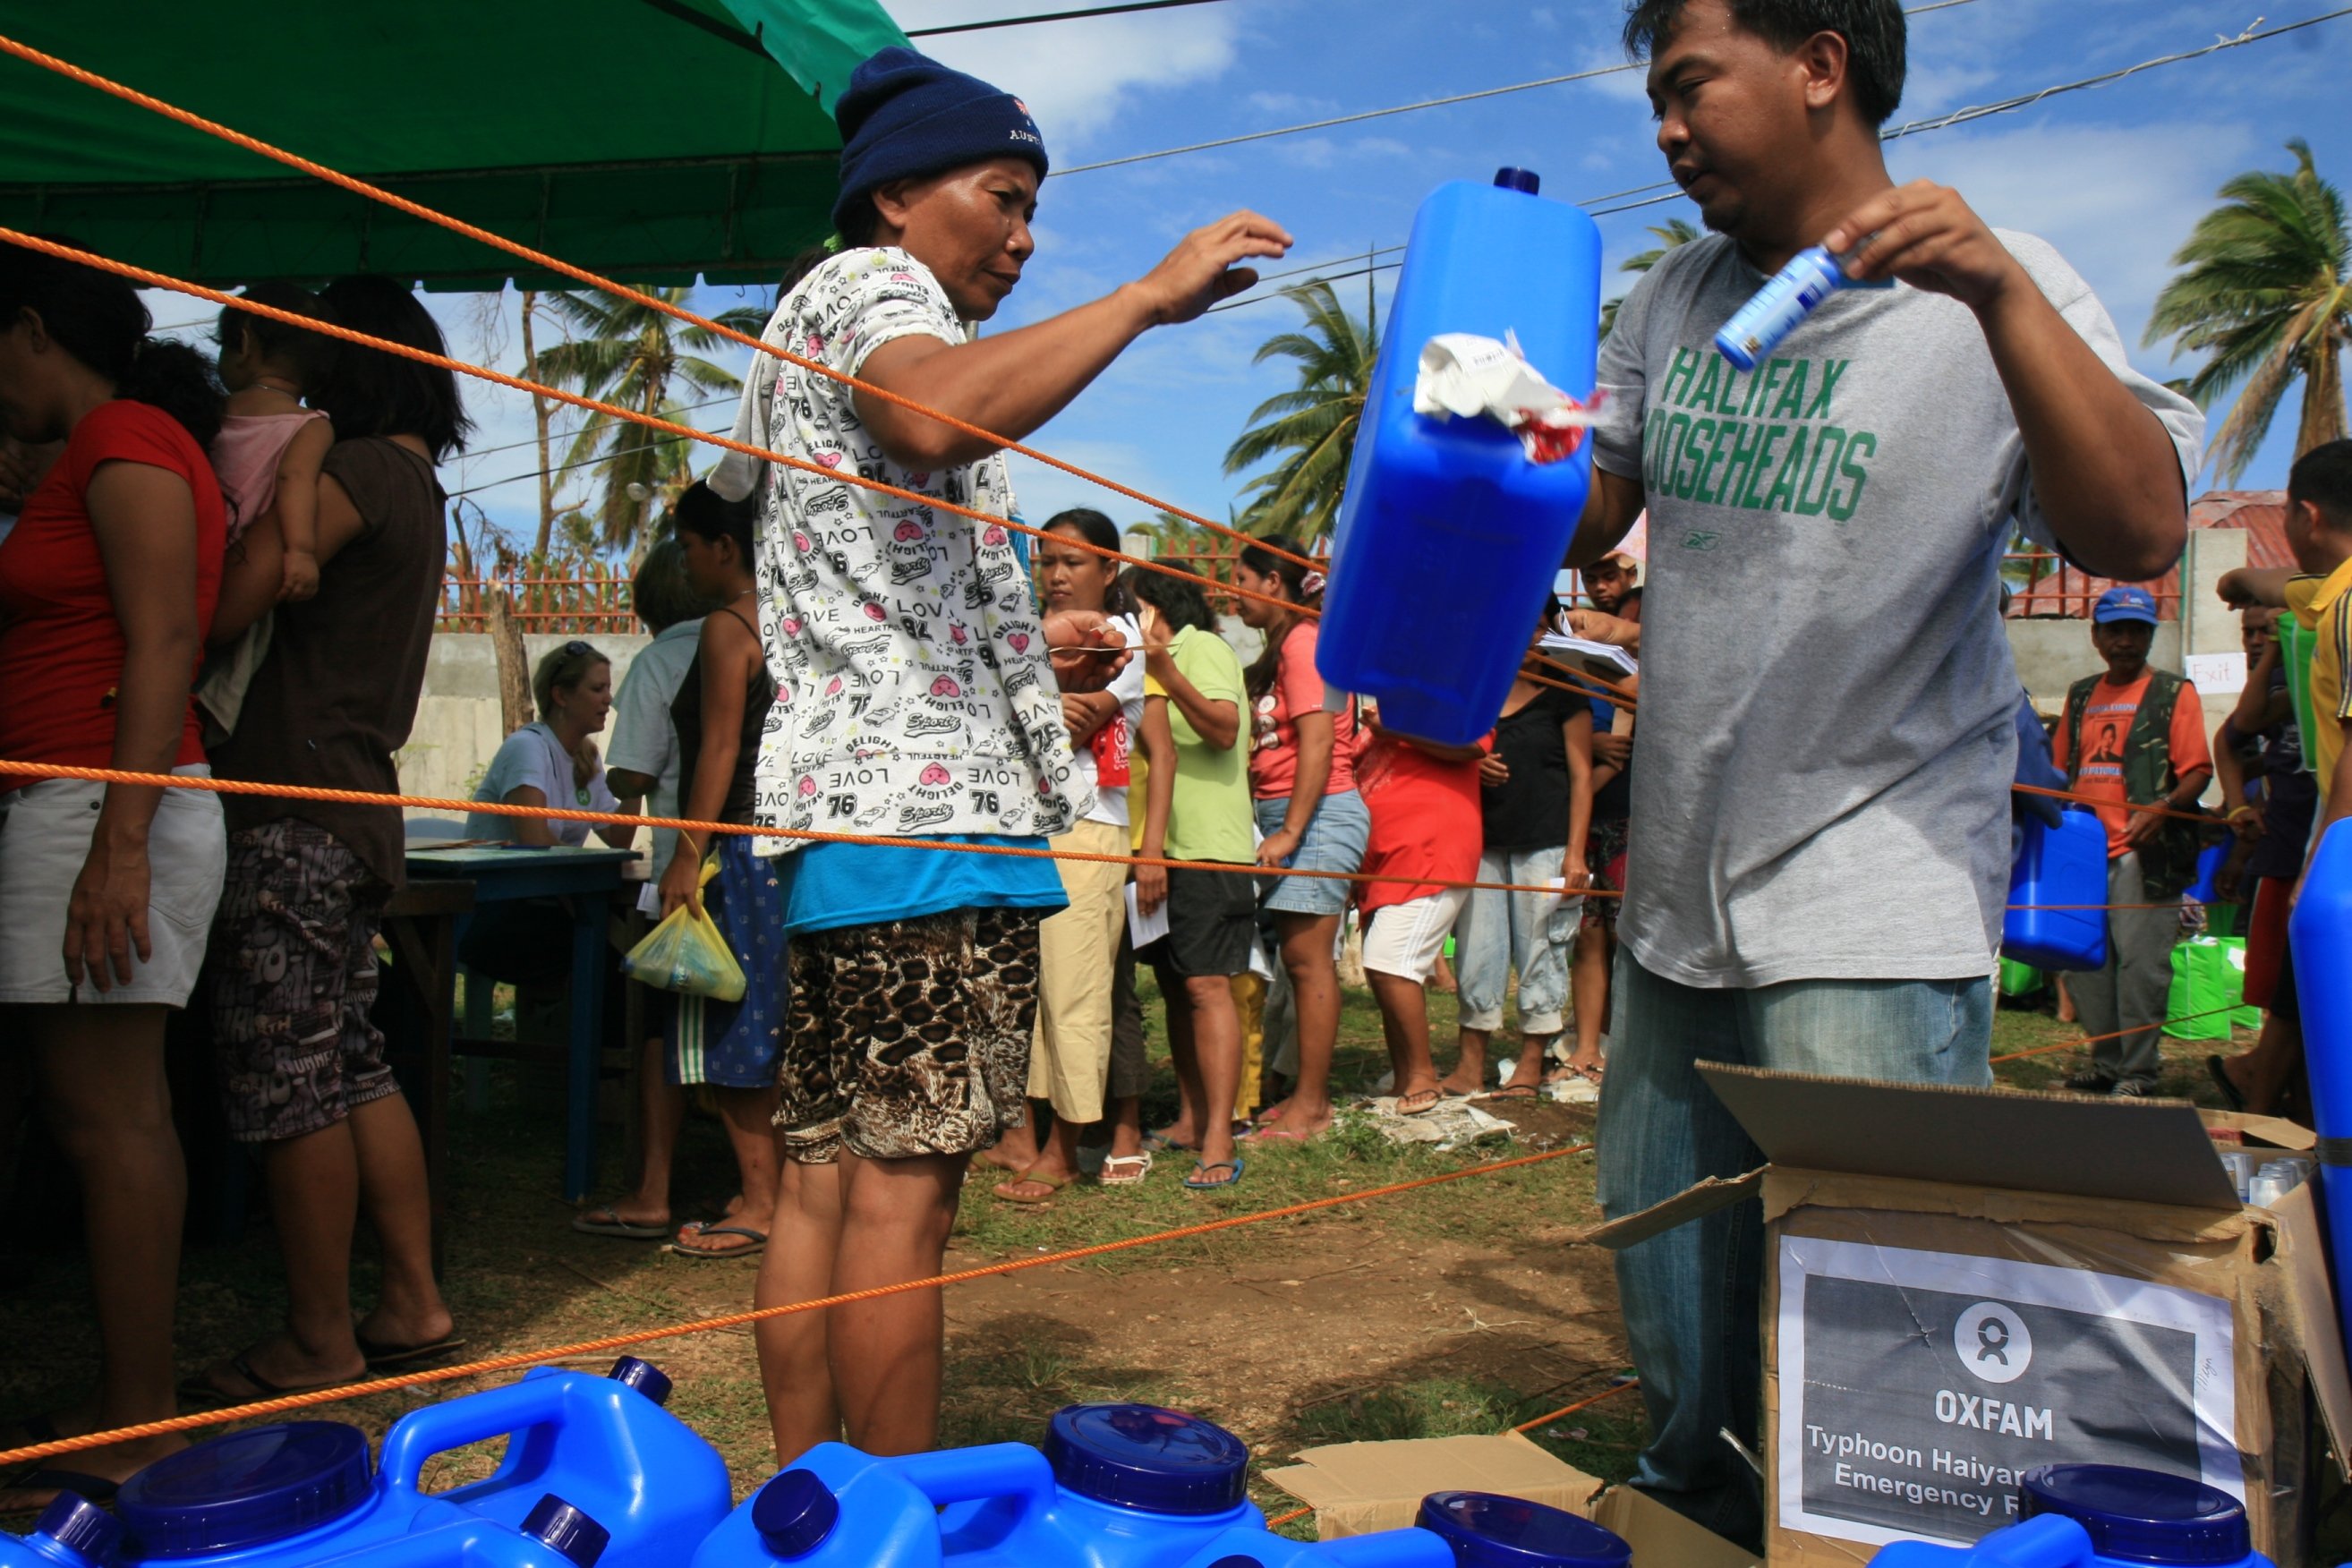 Oxfam’s hygiene and water purification kits were distributed to over 700 families in the coastal region of Daanbantayan over two days.